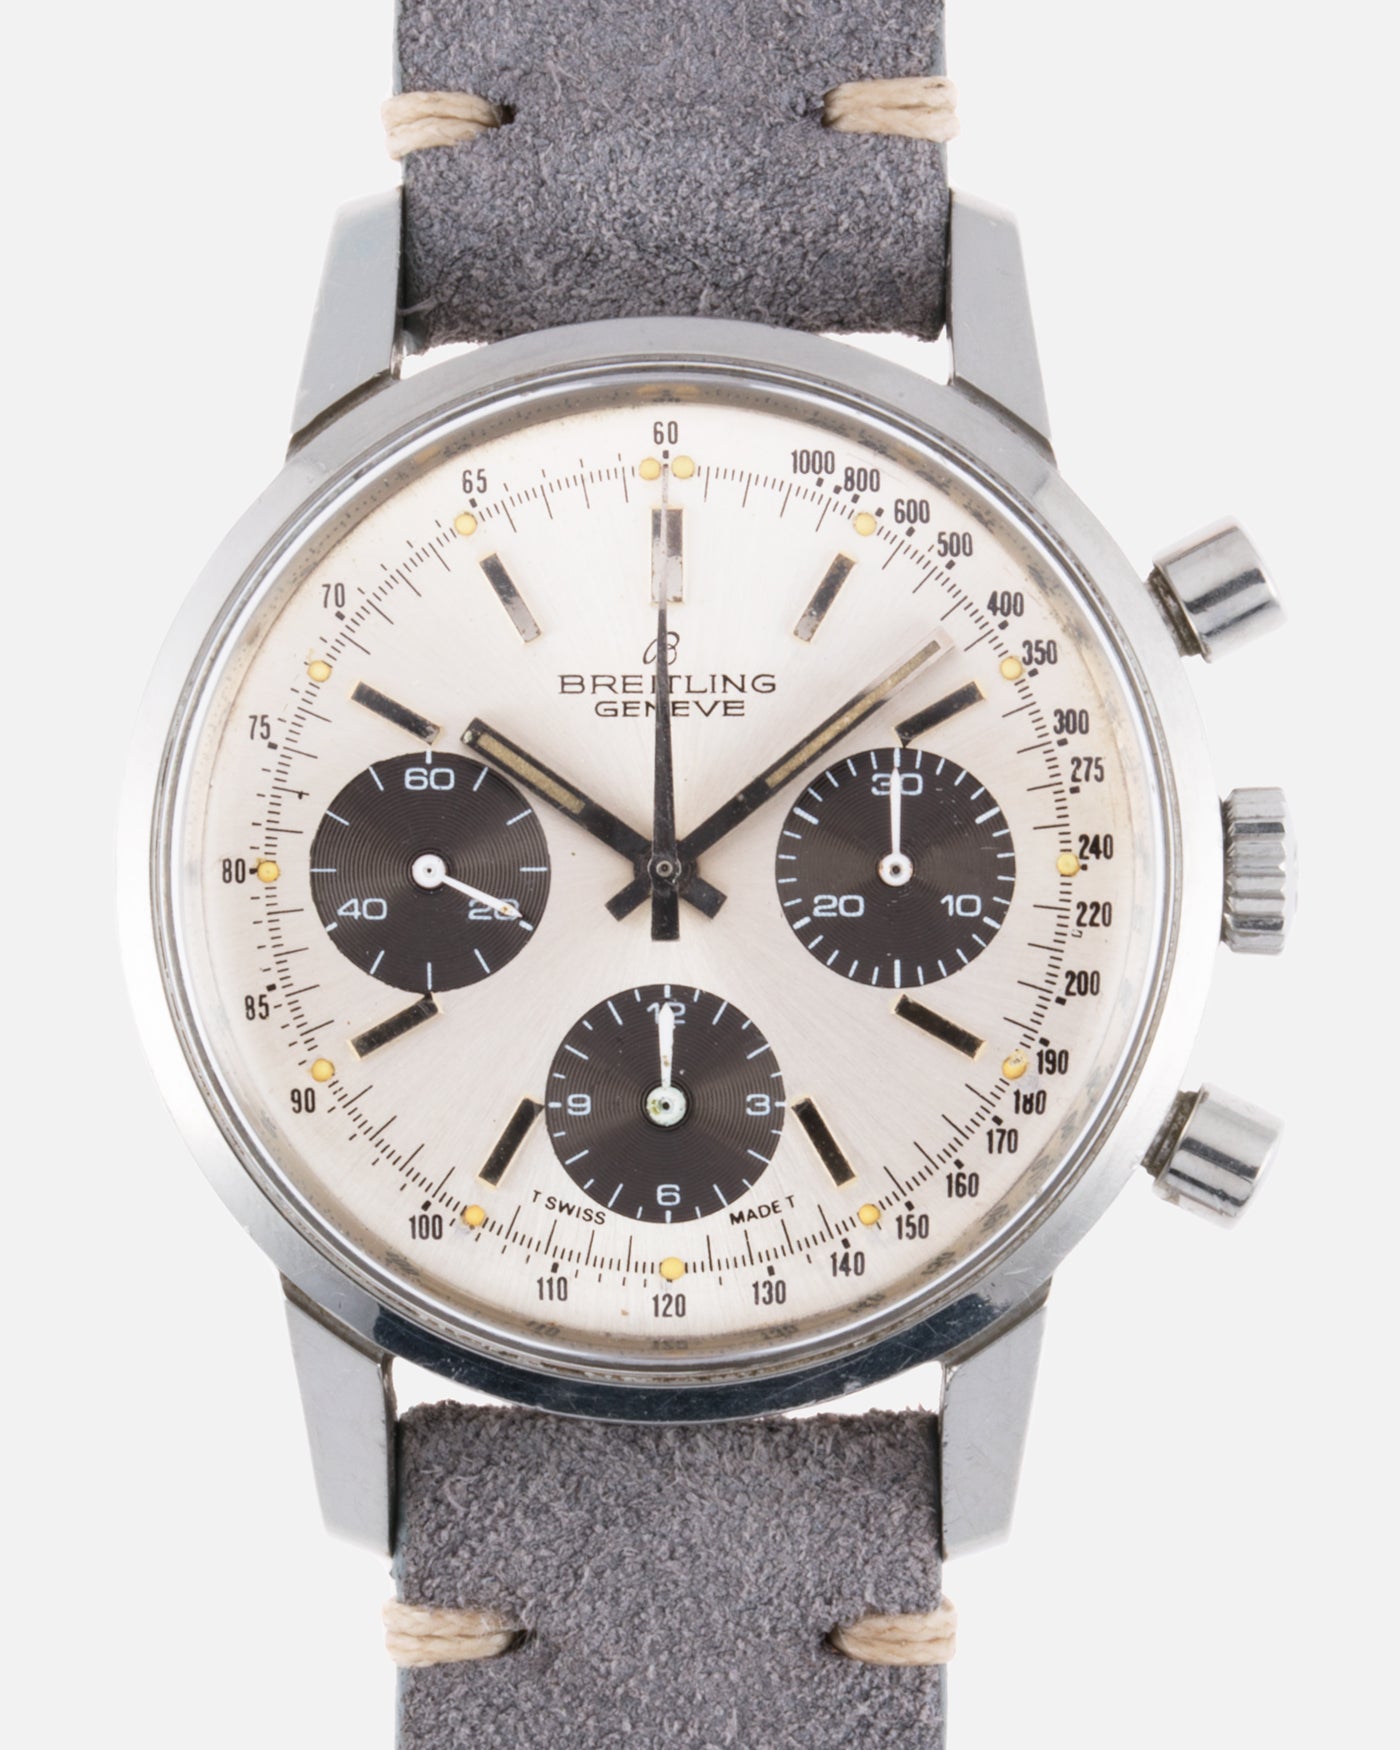 Breitling 'Long Playing' 815